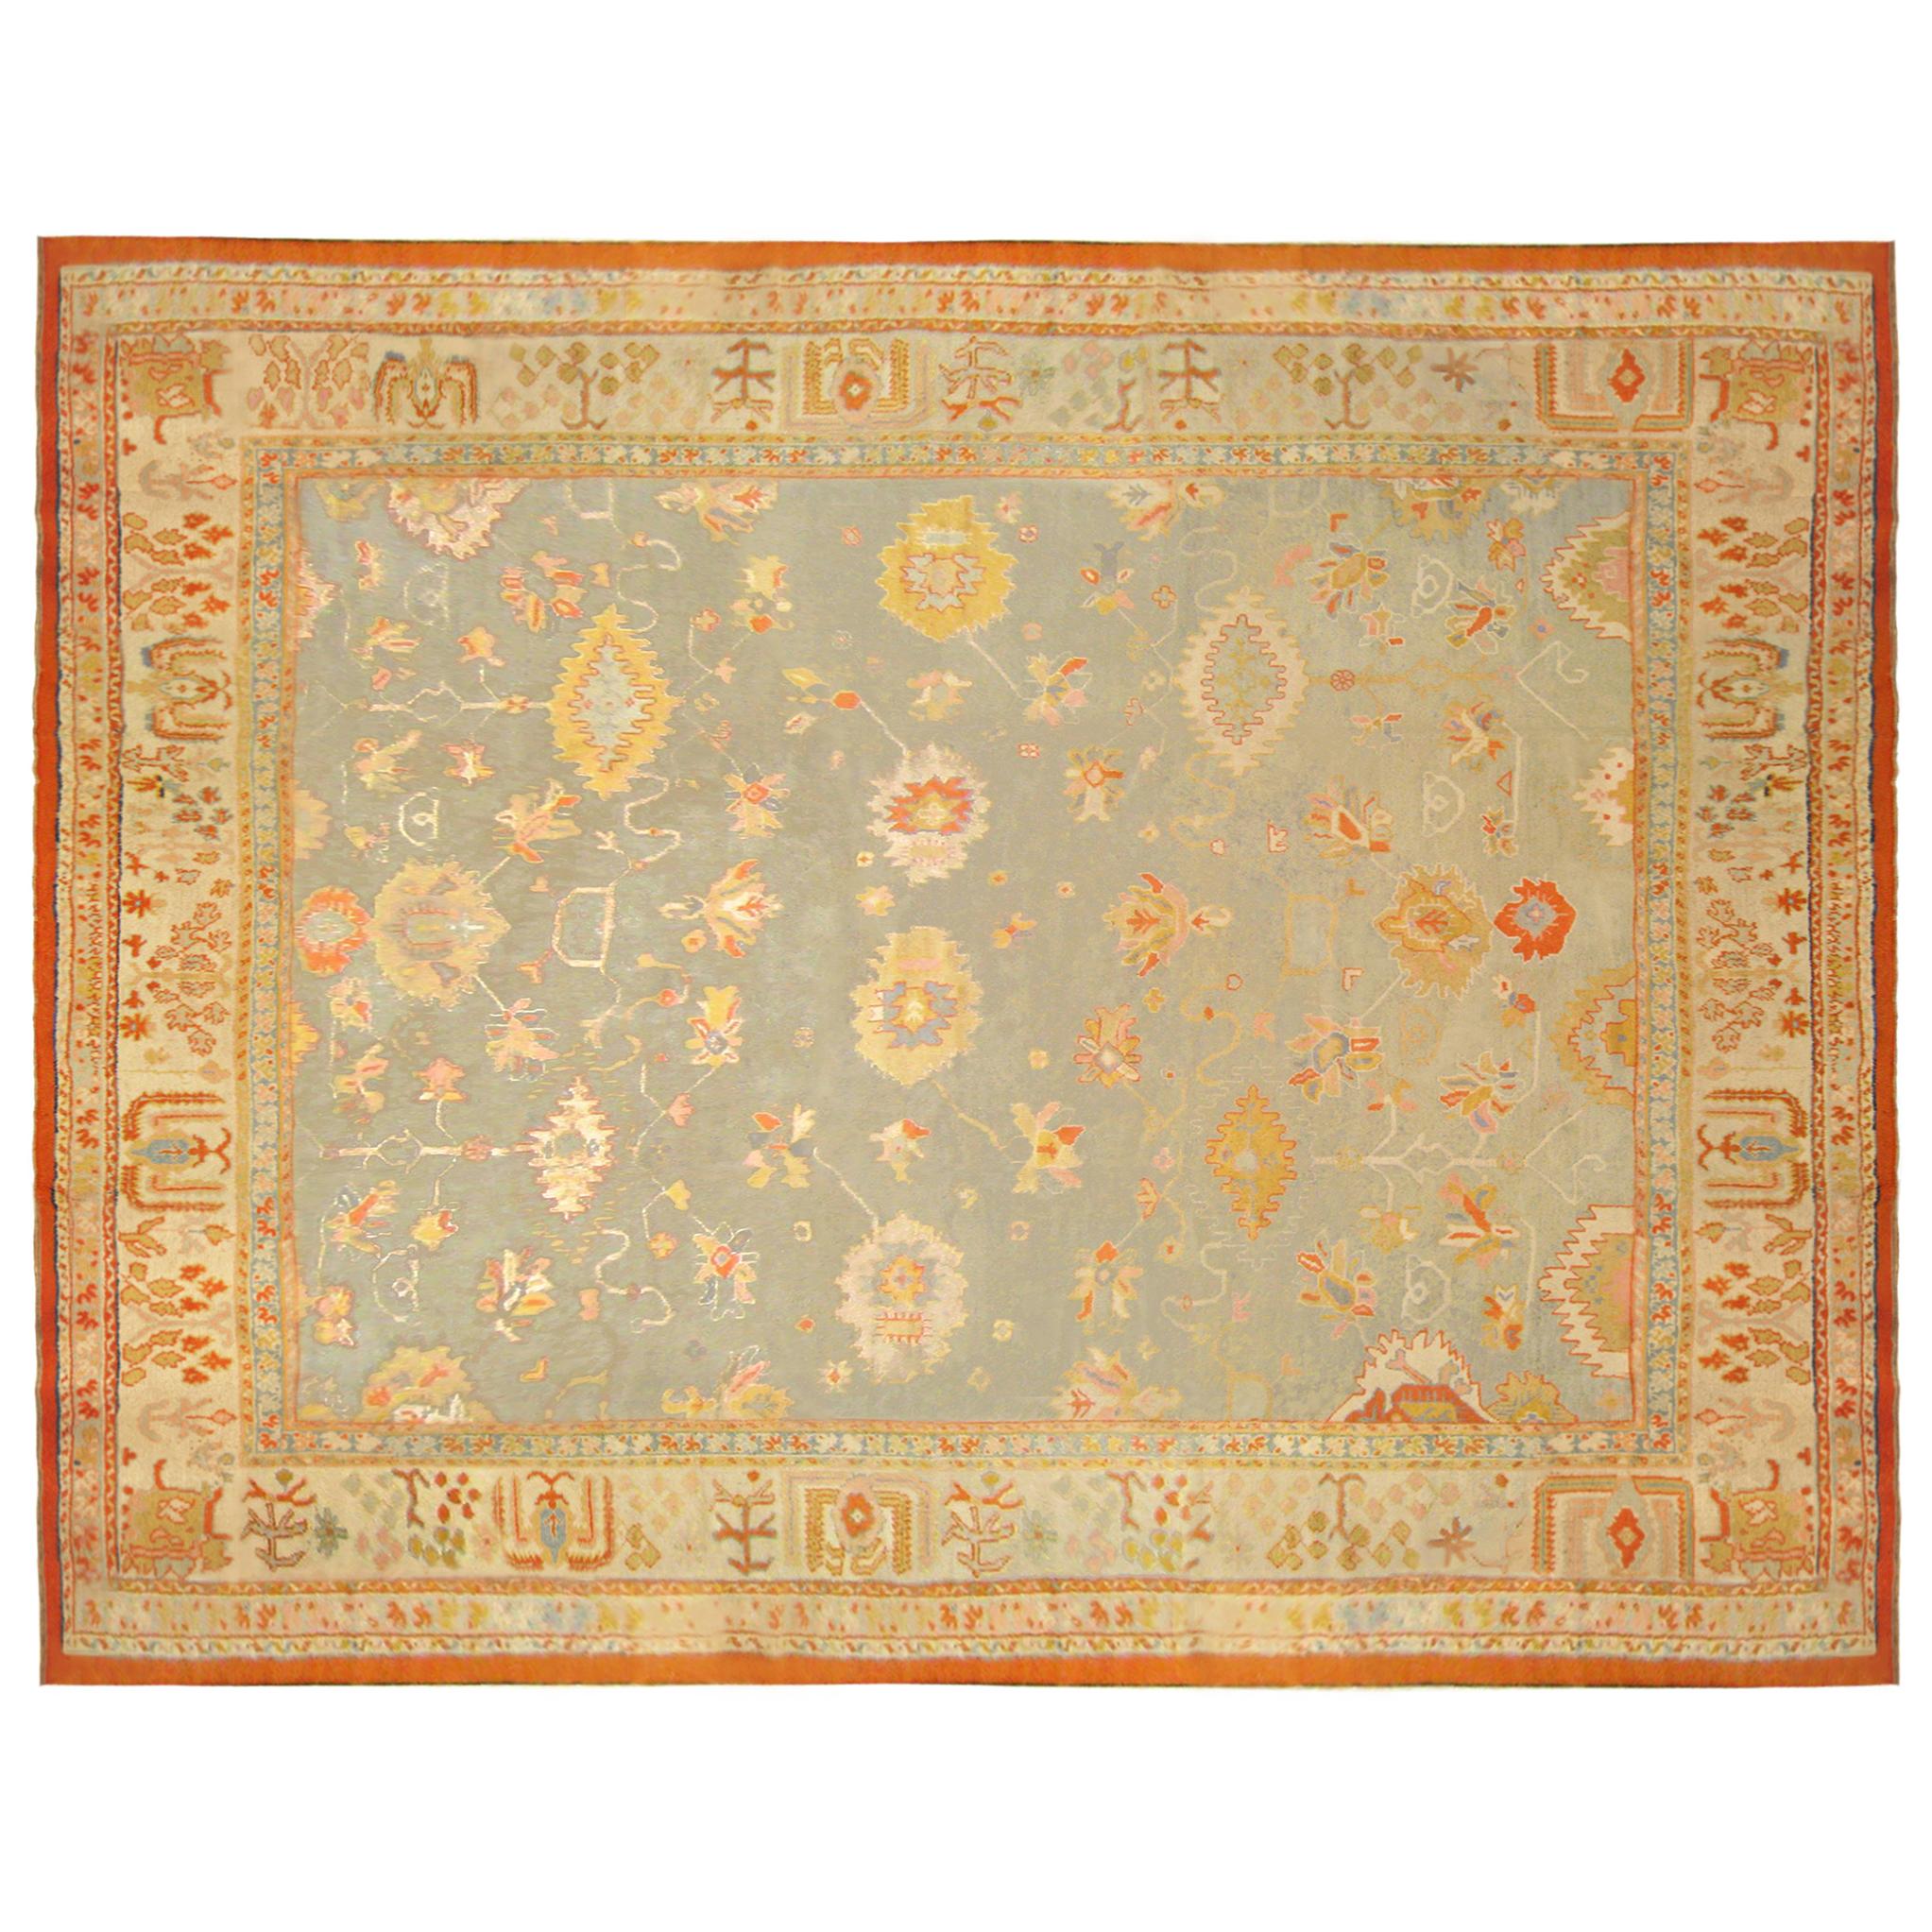 Antique Turkish Oushak Decorative Carpet, in Large Square Size with Soft Colors 